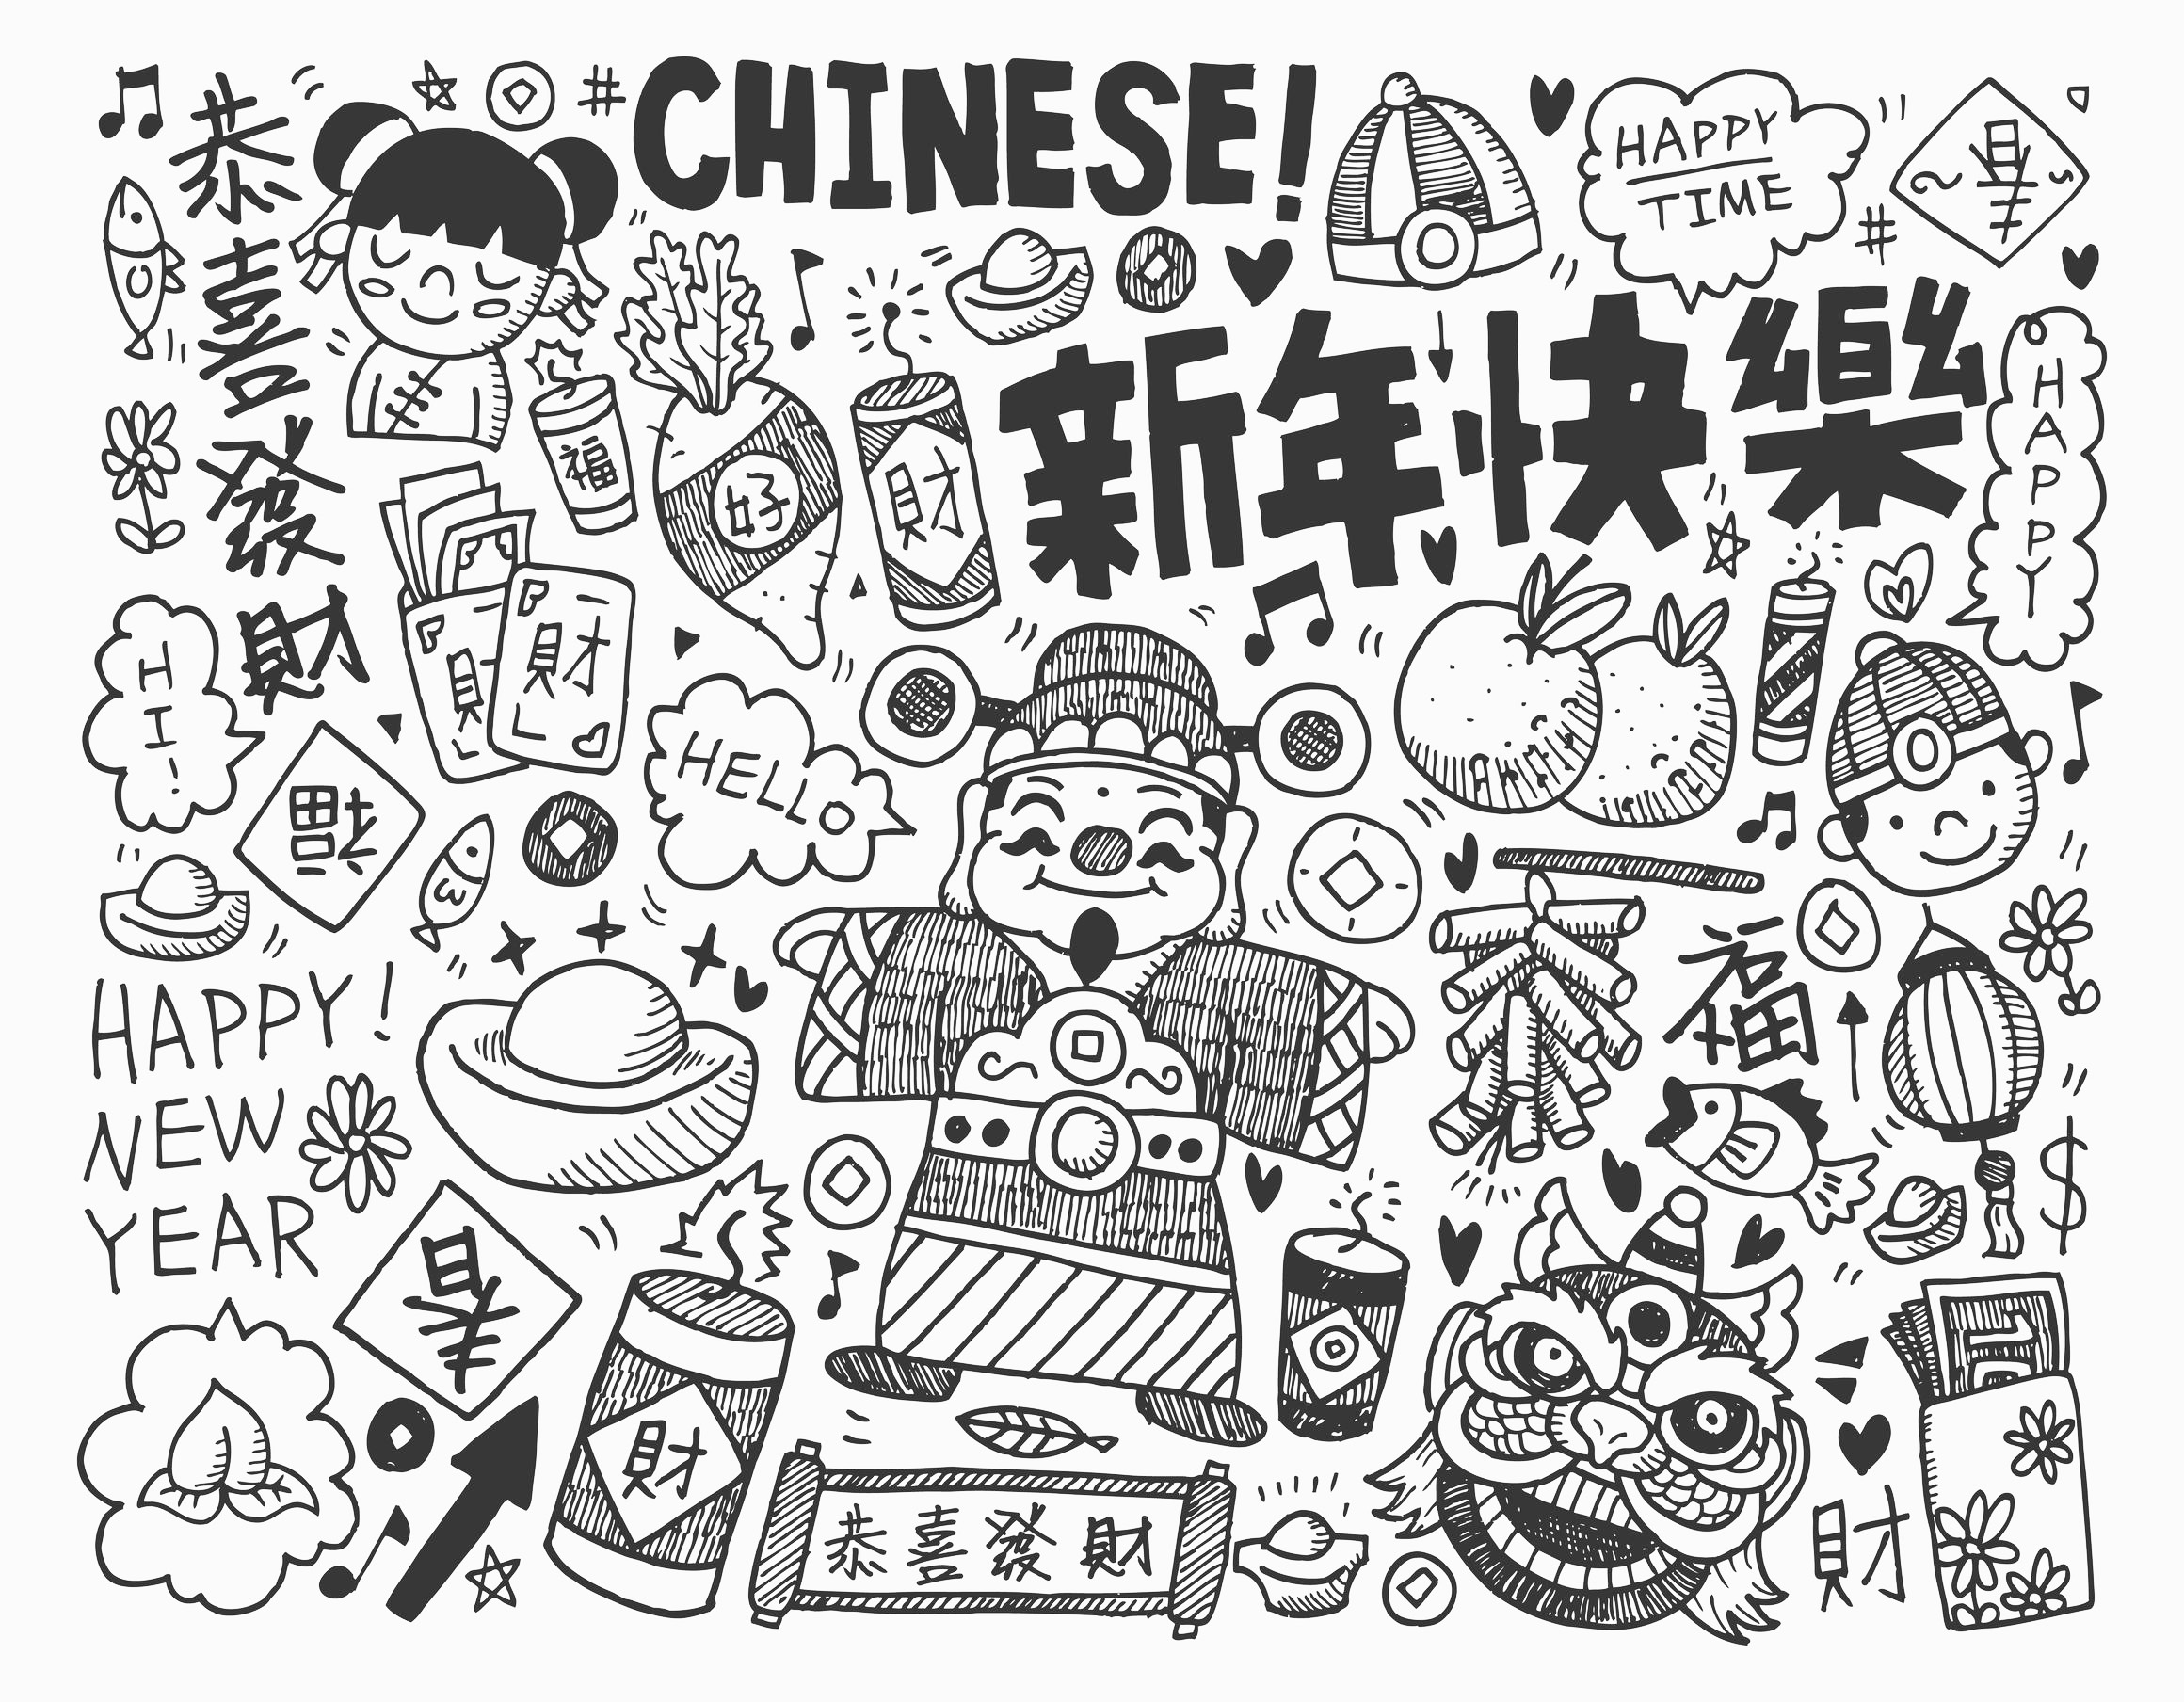 Drawing to color : Chinese New Year, Artist : Notkoo2008   Source : 123rf